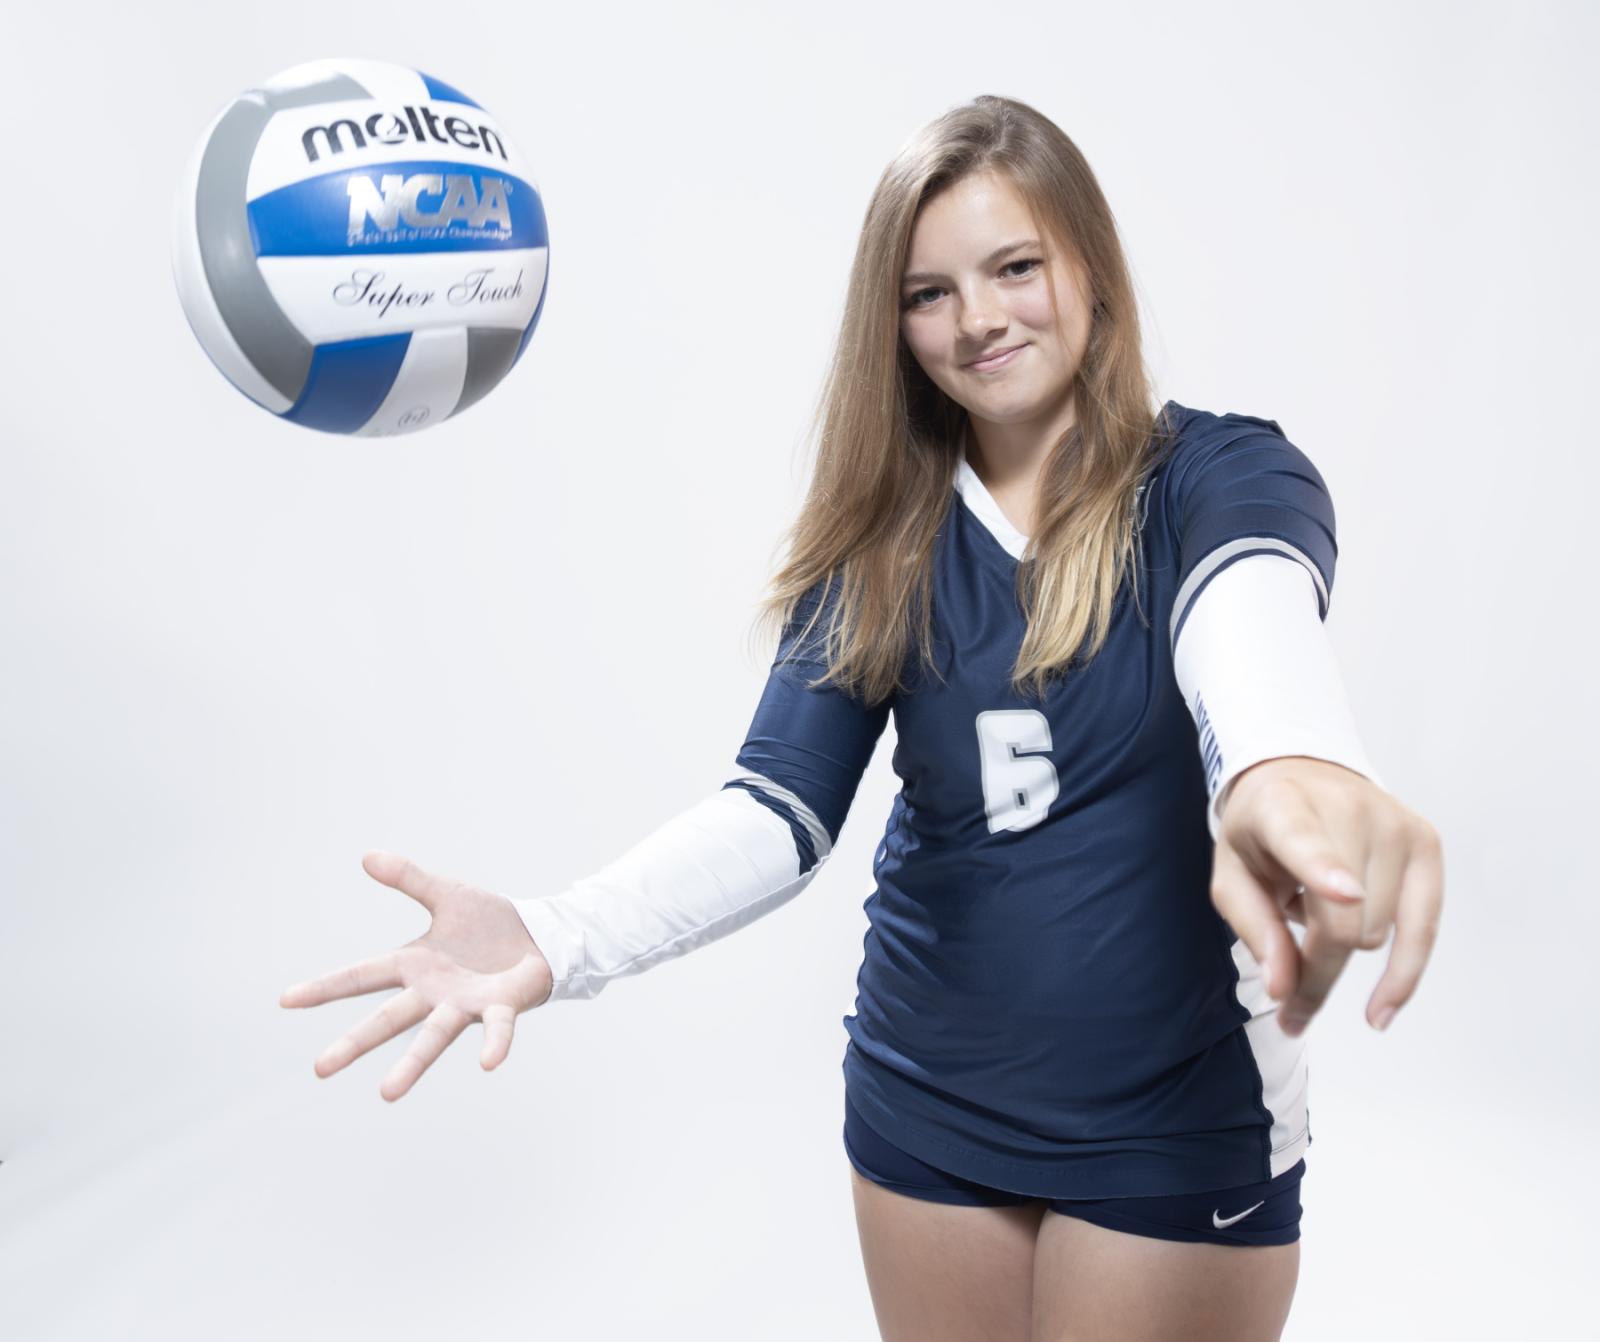 Taylor Hughes plays with a volleyball during a Media Day photo shoot.